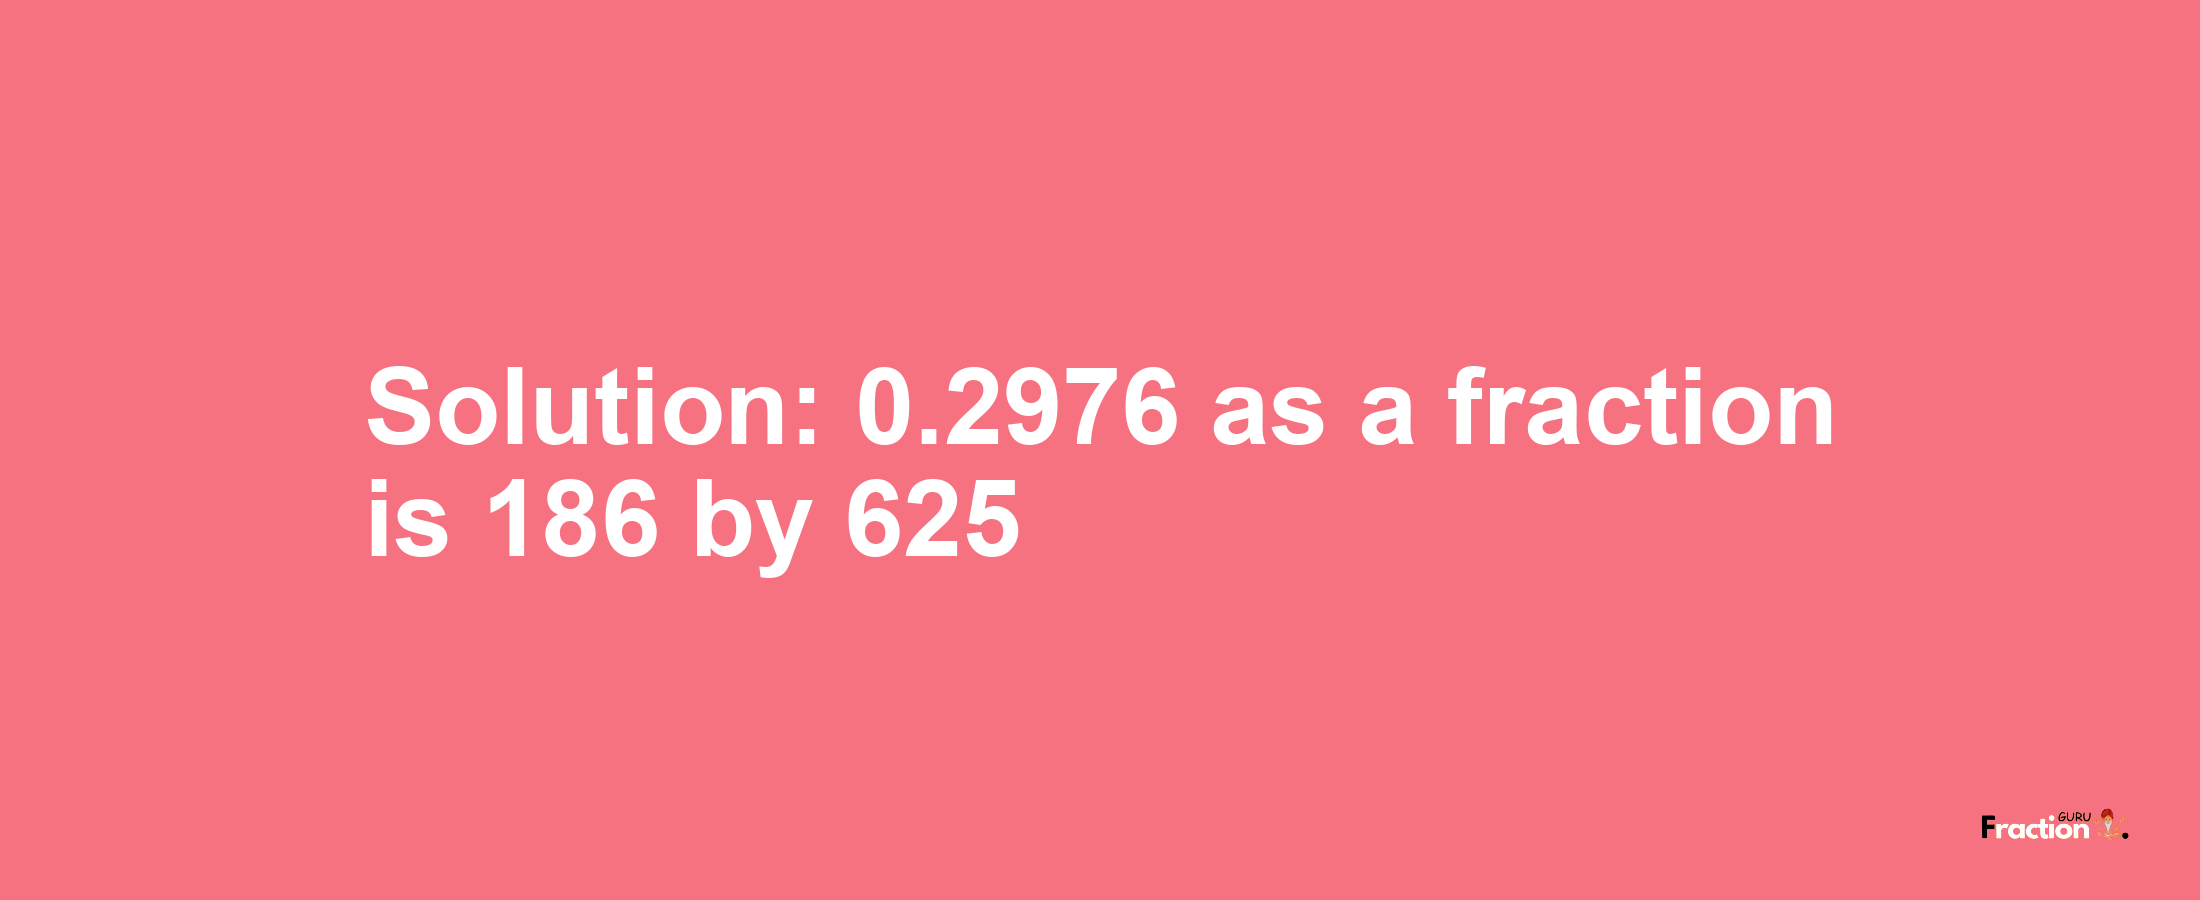 Solution:0.2976 as a fraction is 186/625